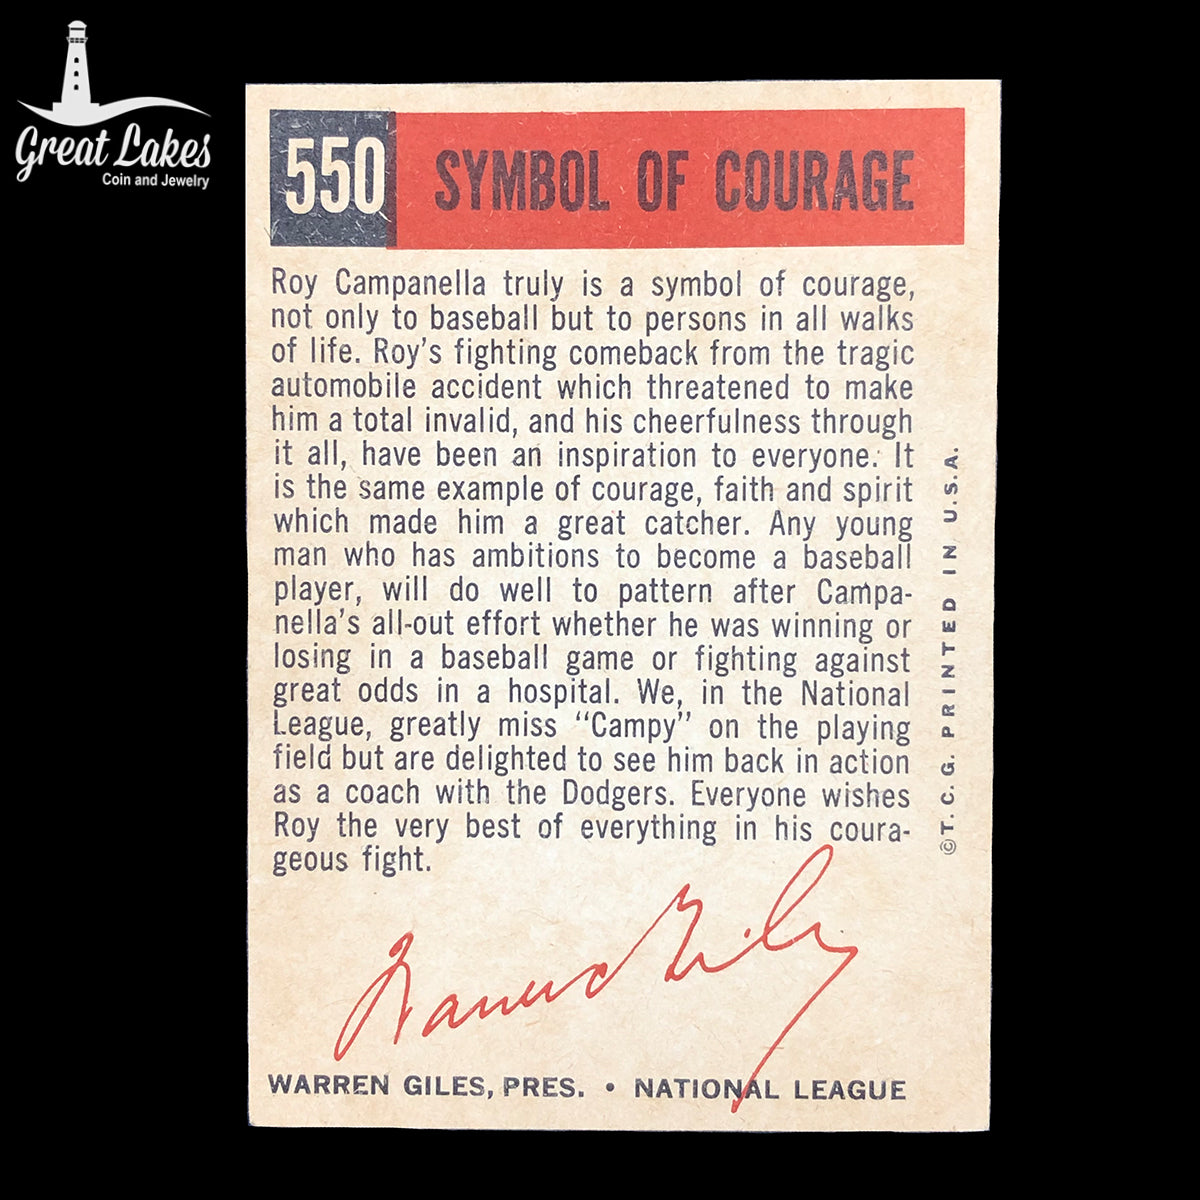 1959 Topps Roy Campanella Card #550 “Symbol of Courage”